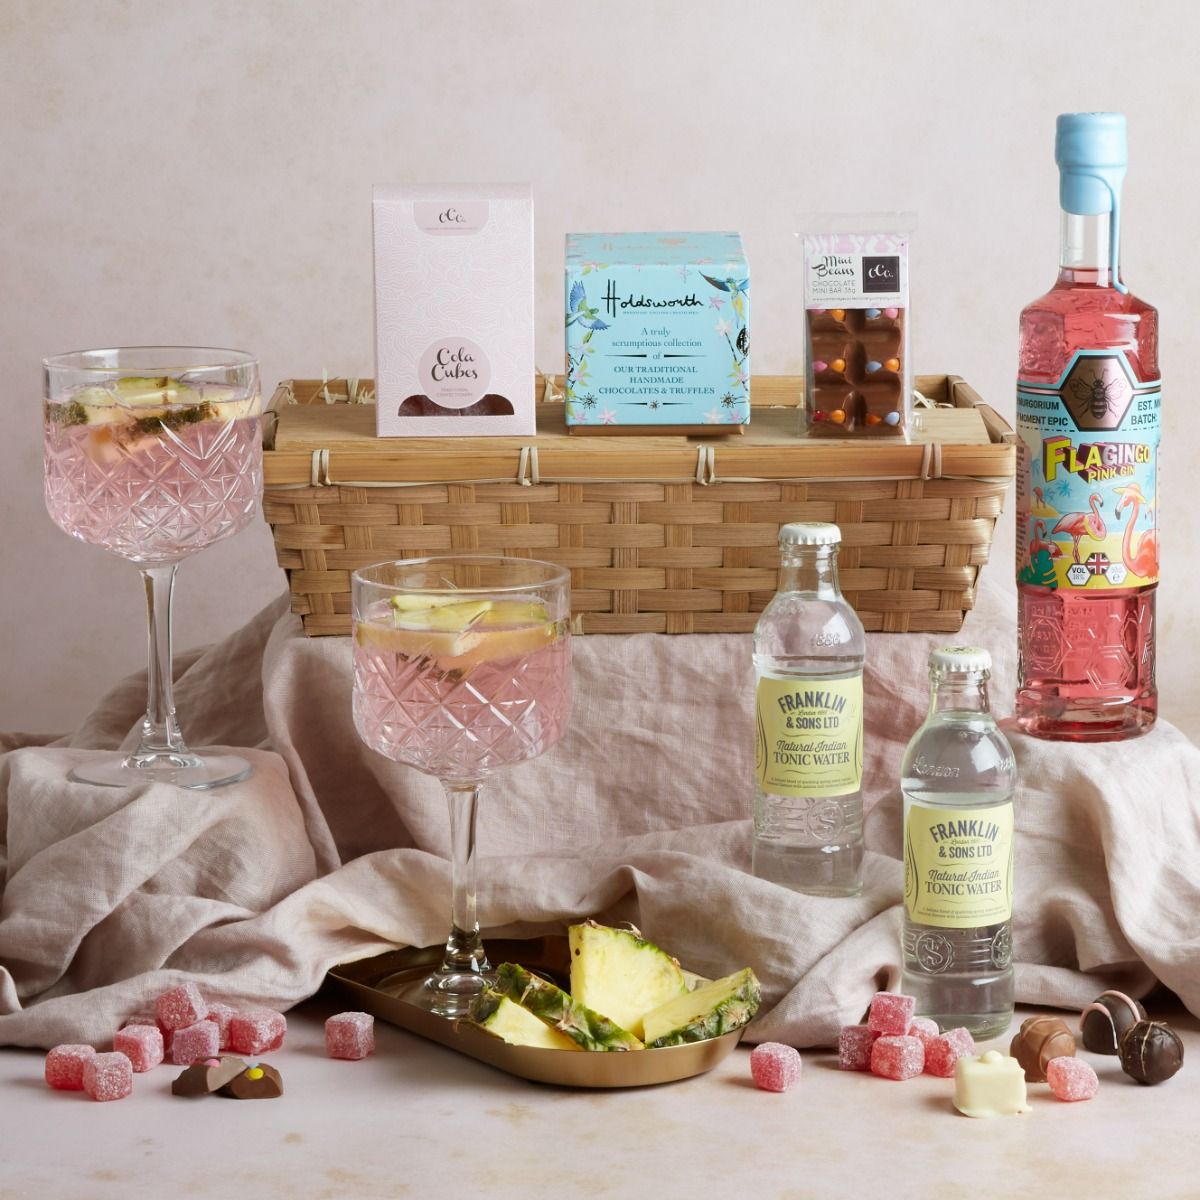 flagingo pink gin hamper content on display with signature bamboo tray